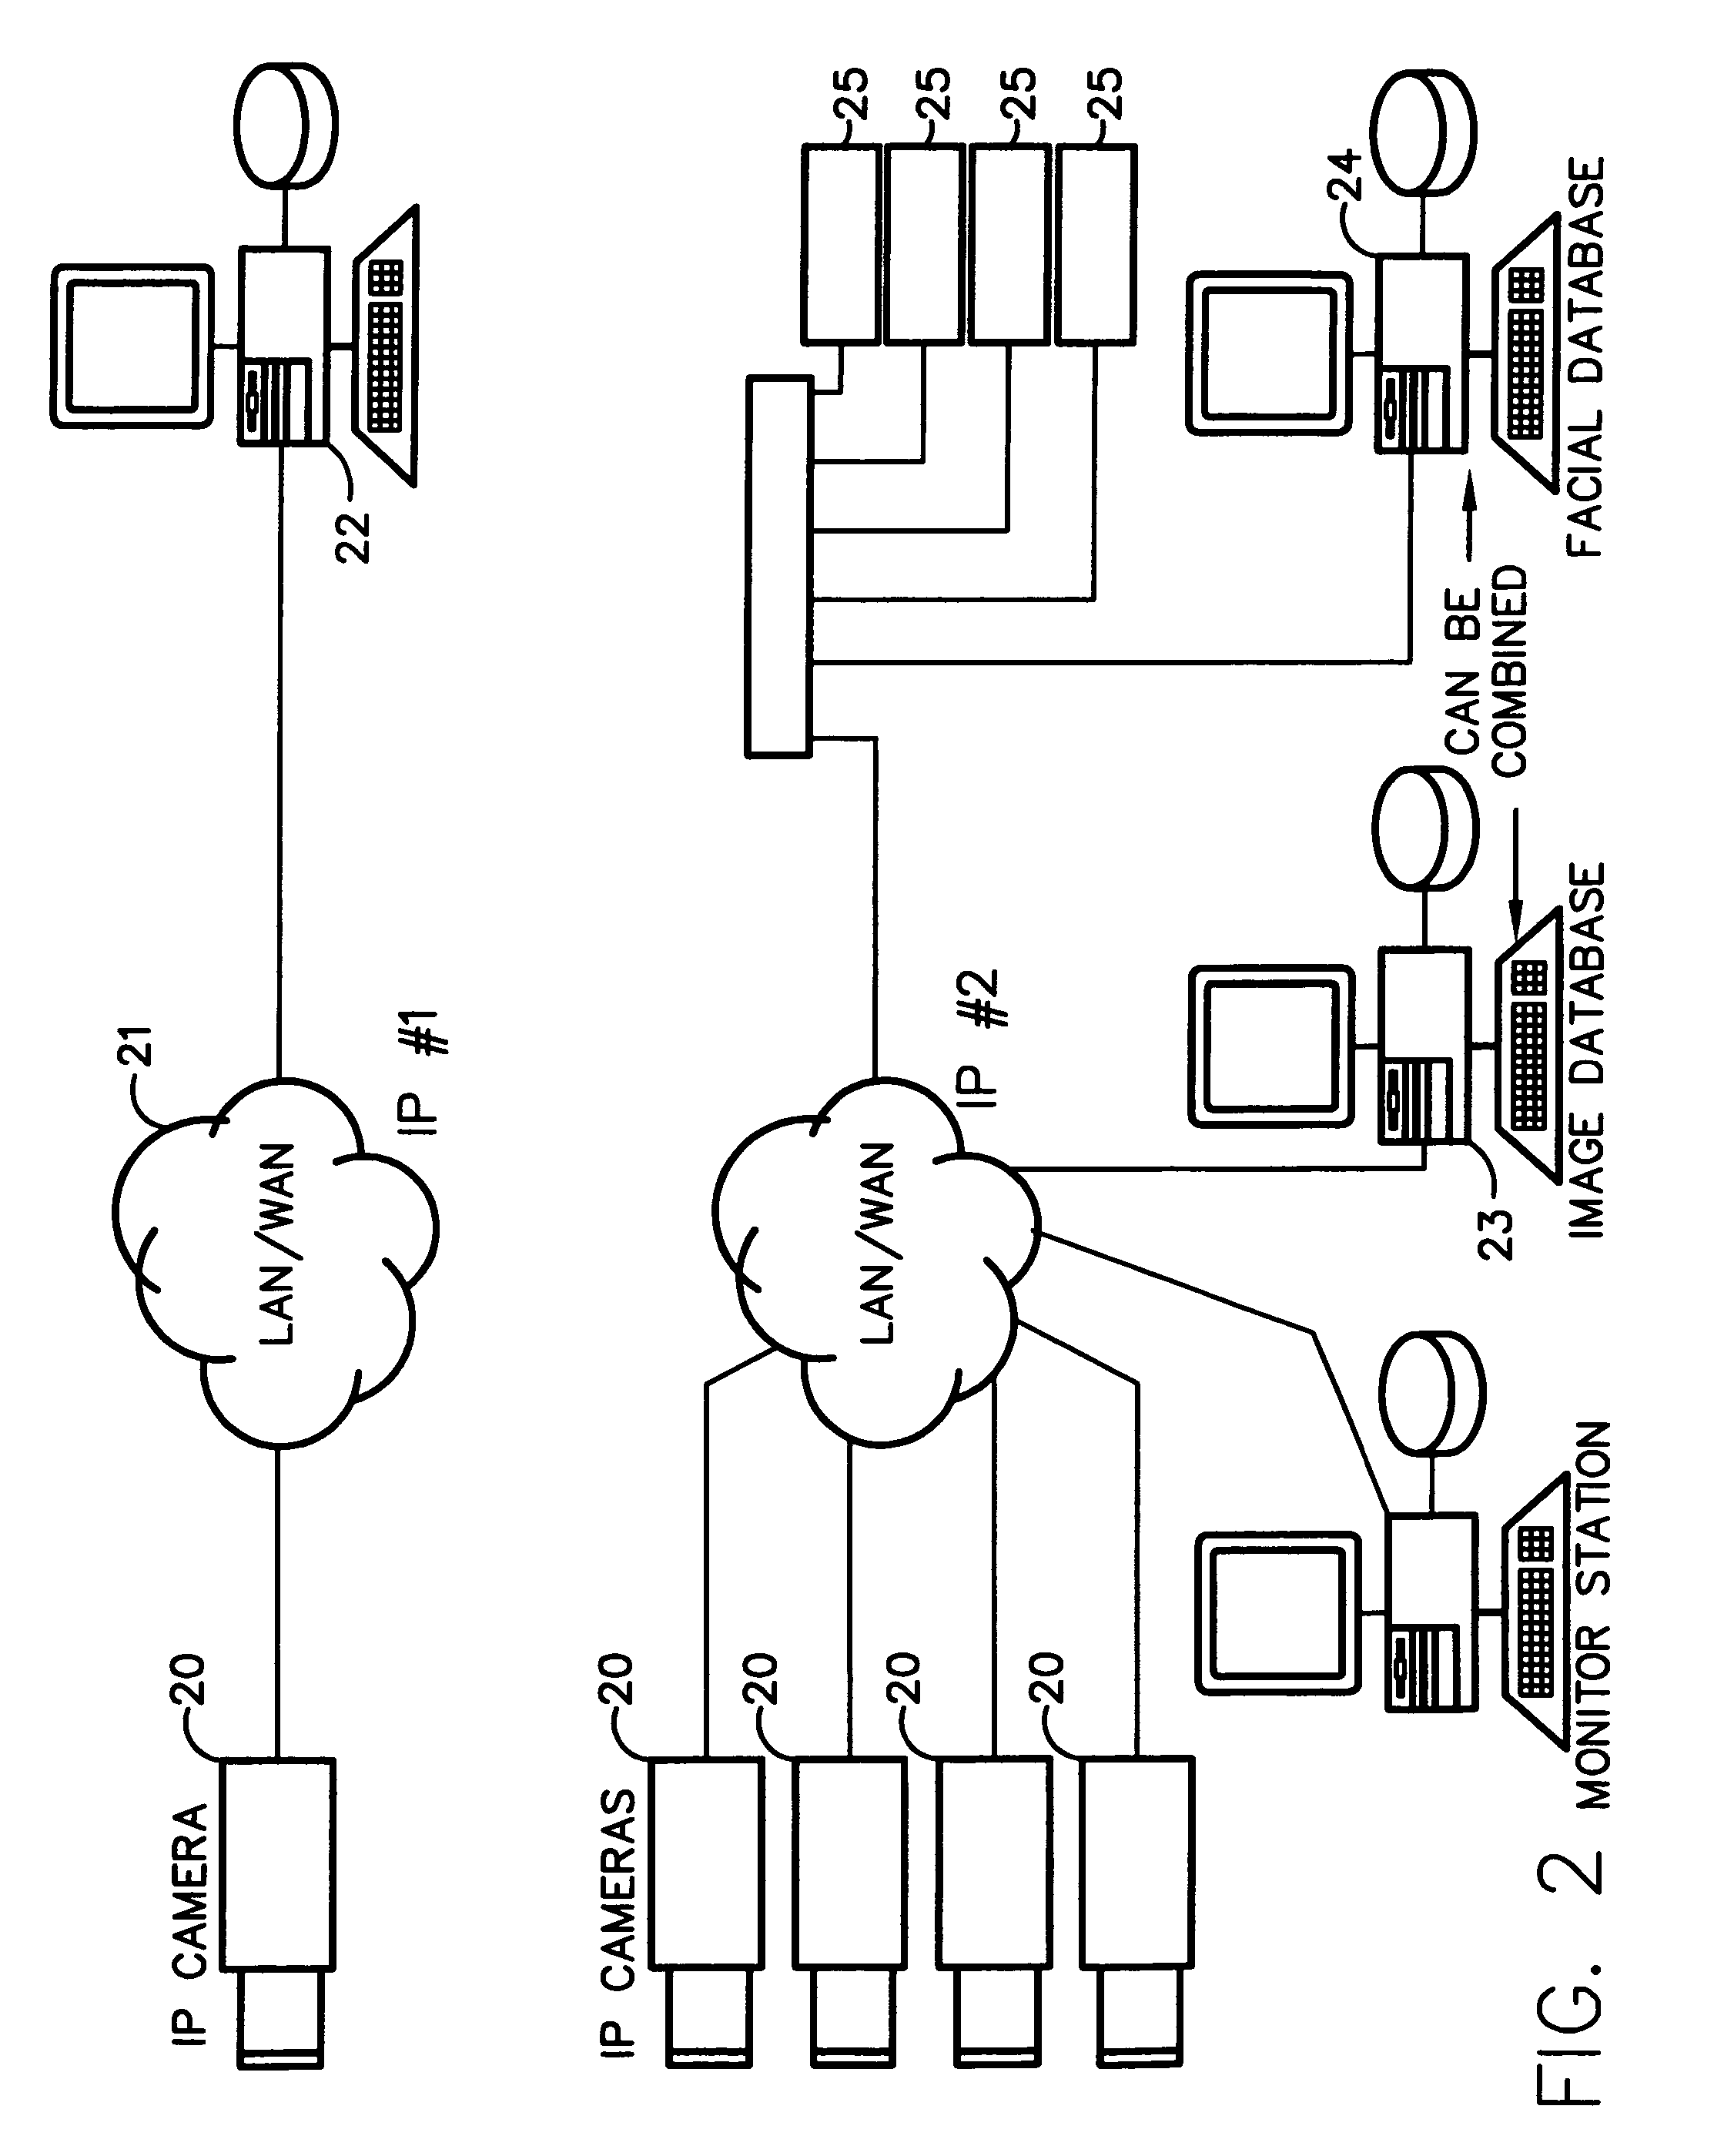 Method for incorporating facial recognition technology in a multimedia surveillance system